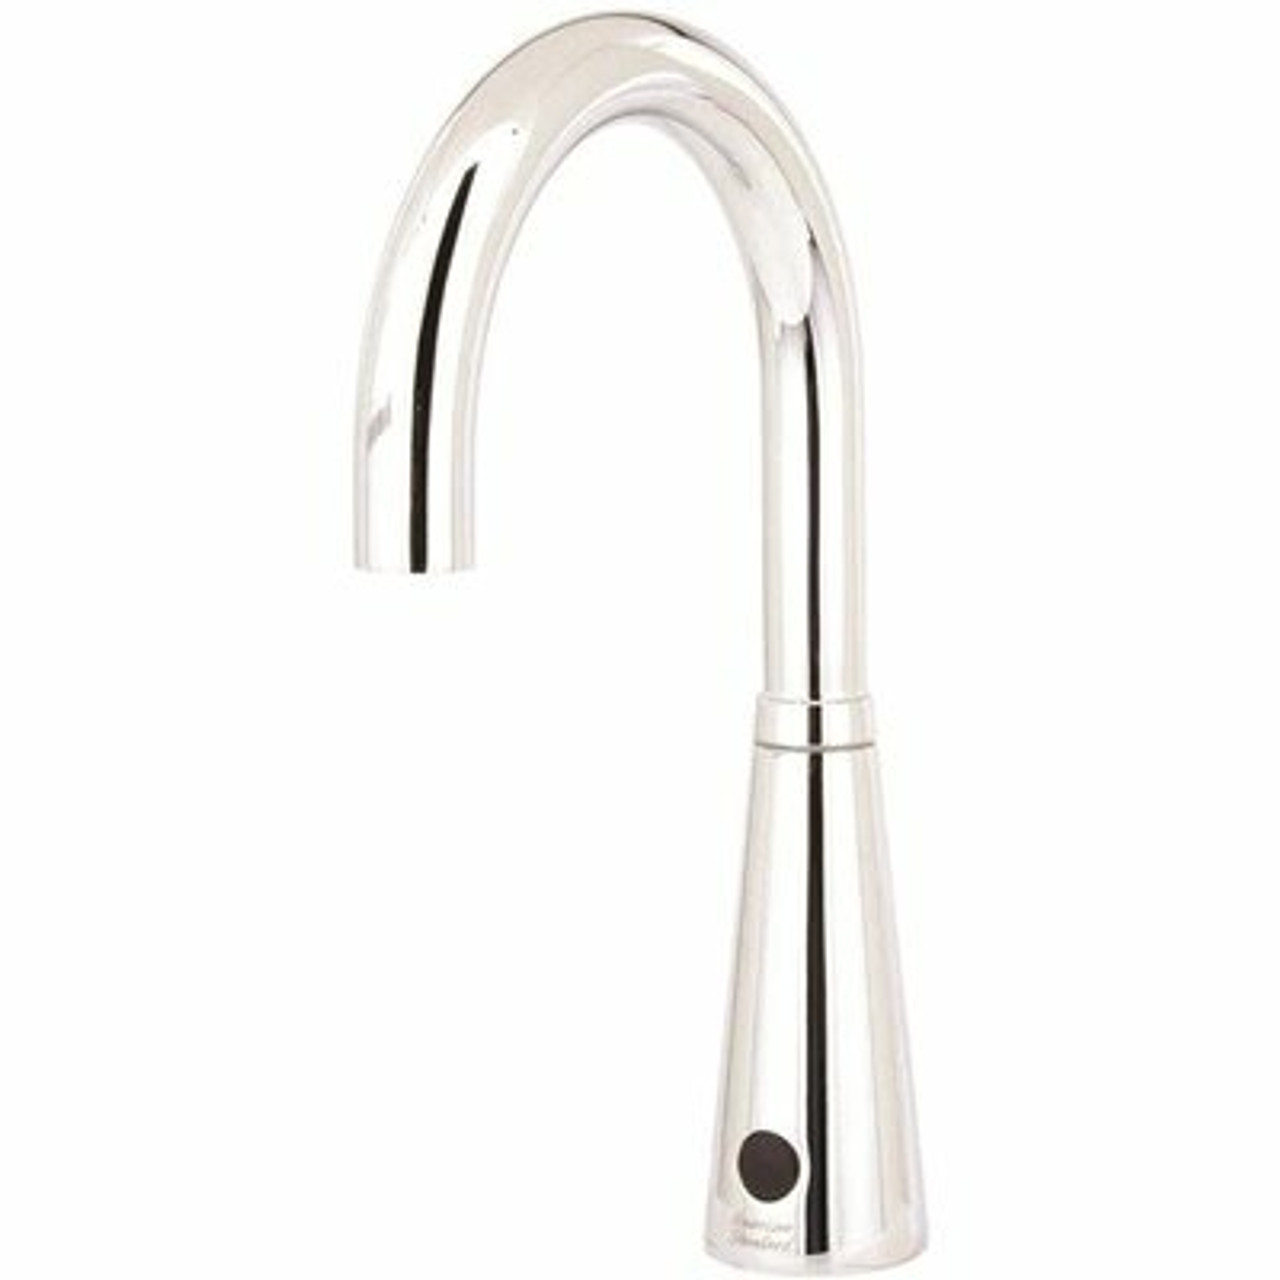 Selectronic Dc Powered Single Hole Touchless Bathroom Faucet With 6 In. Gooseneck Spout 1.5 Gpm In Polished Chrome